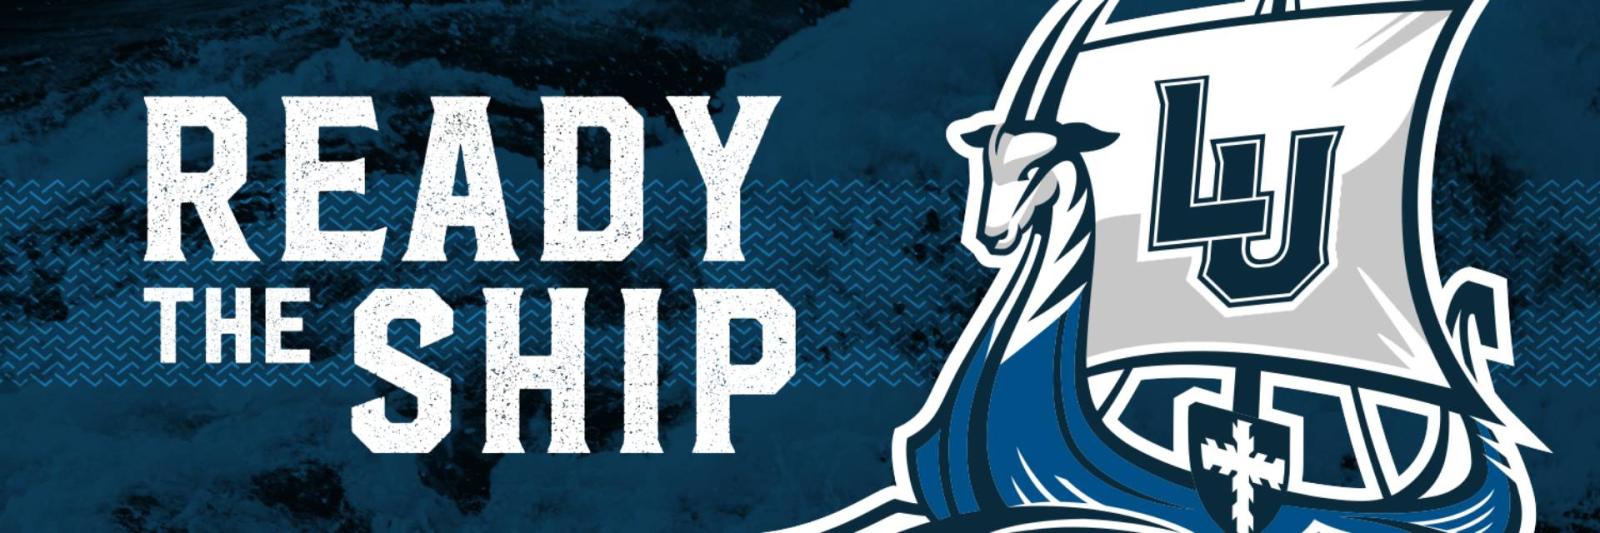 Twitter cover photo with "Ready the ship" written on the left side of the banner and the LU Viking logo on the right side of the banner.